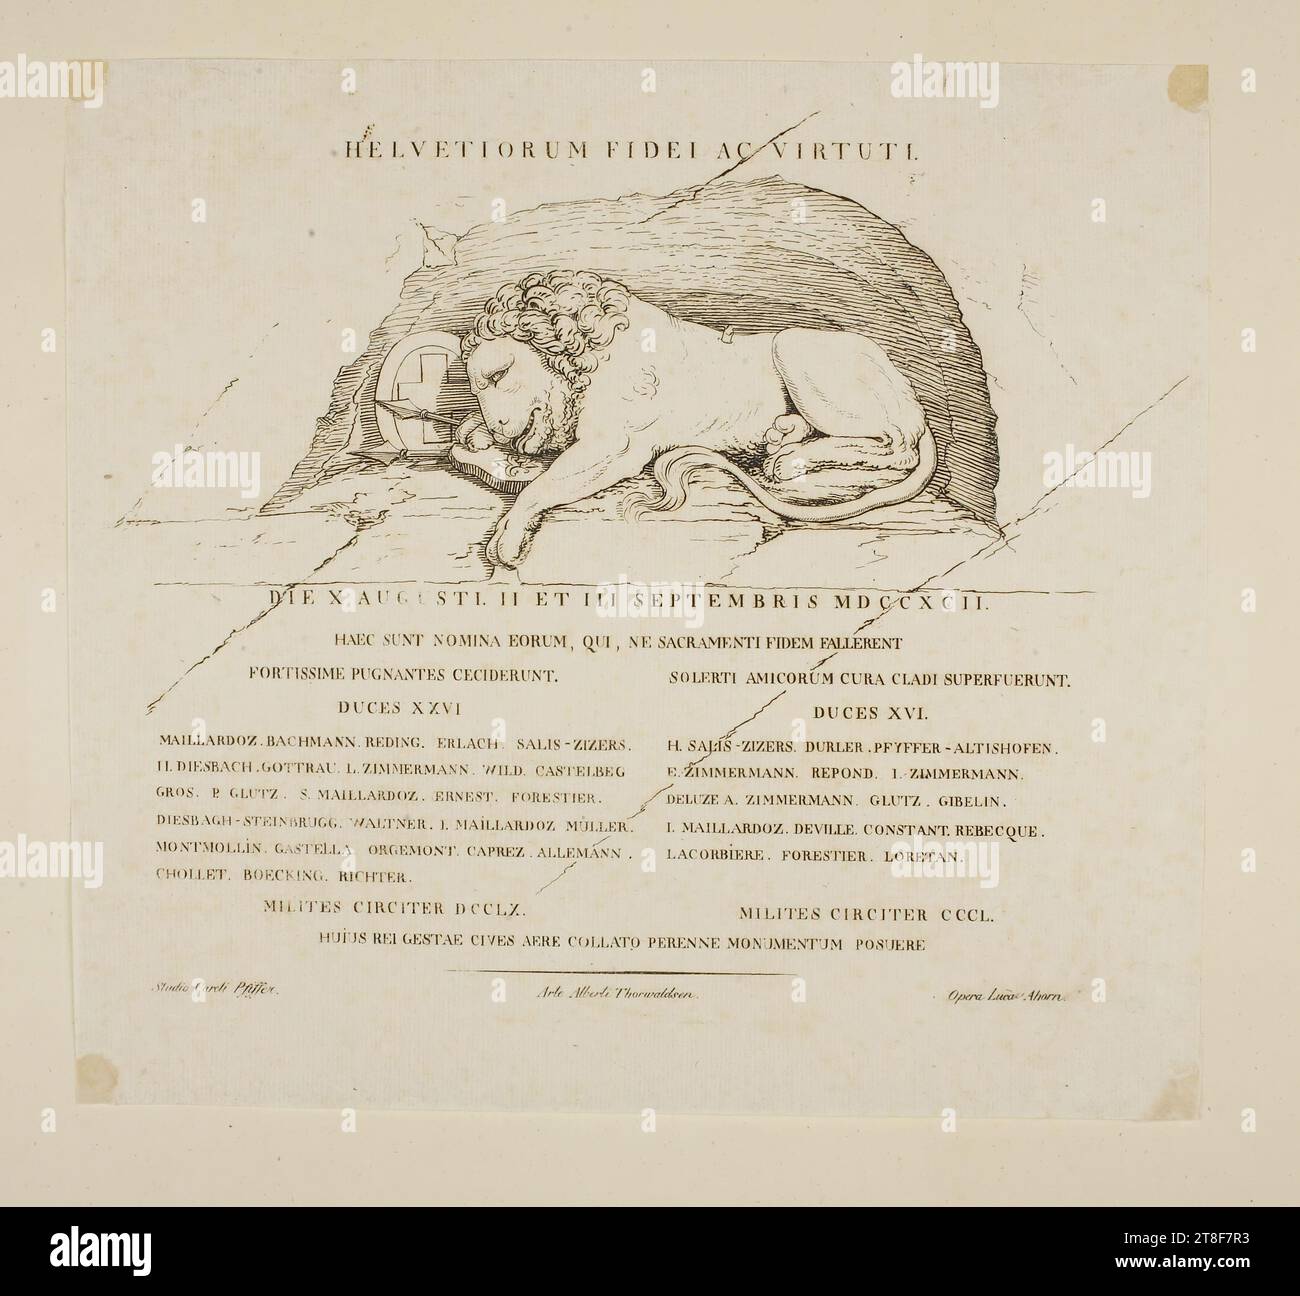 Dying Lion (The Lucerne Lion), No earlier than 1821 - No later than 1900, Graphic Art, Lithograph, Paper, Color, Printer's ink, Lithography, Printet, Height (plate size?) 238 mm, Width (plate size?) 260 mm, HELVETIORUM FIDEI AC VIRTUTI, DIE X AUGUSTI. II ET III SEPTEMBRIS MDCCXCII, Studio Caroli Pfeiffer, Arte Alberti Thorwaldsen, Opere Luca Ahorn, Graphic Design, European Stock Photo